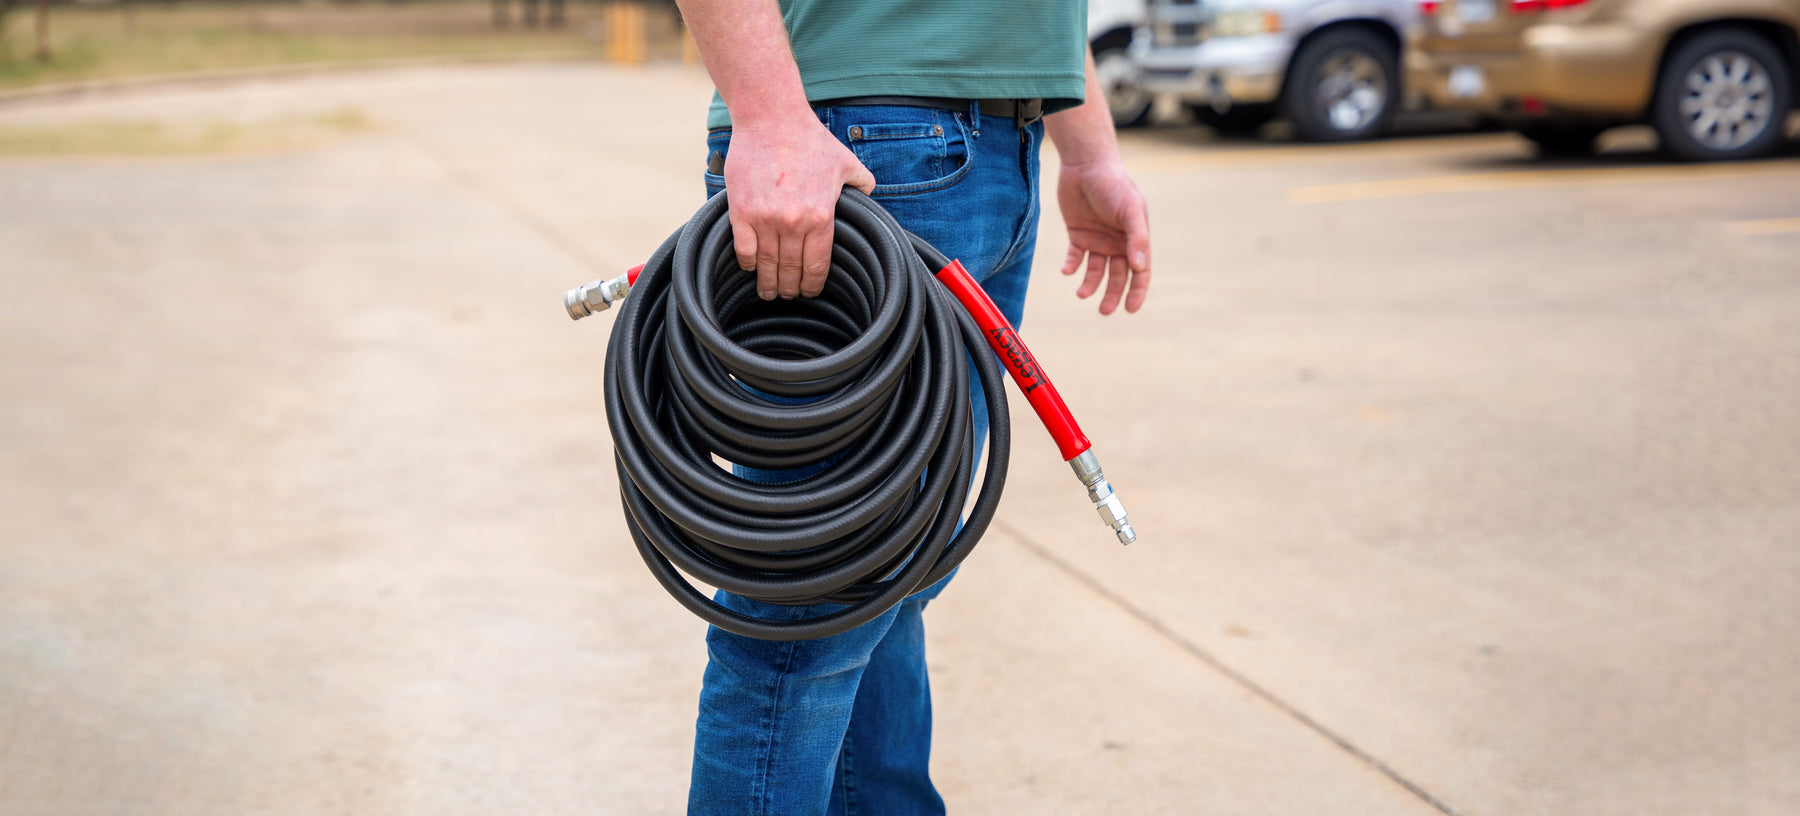 Do Pressure Washers Work Better With Longer Hoses?